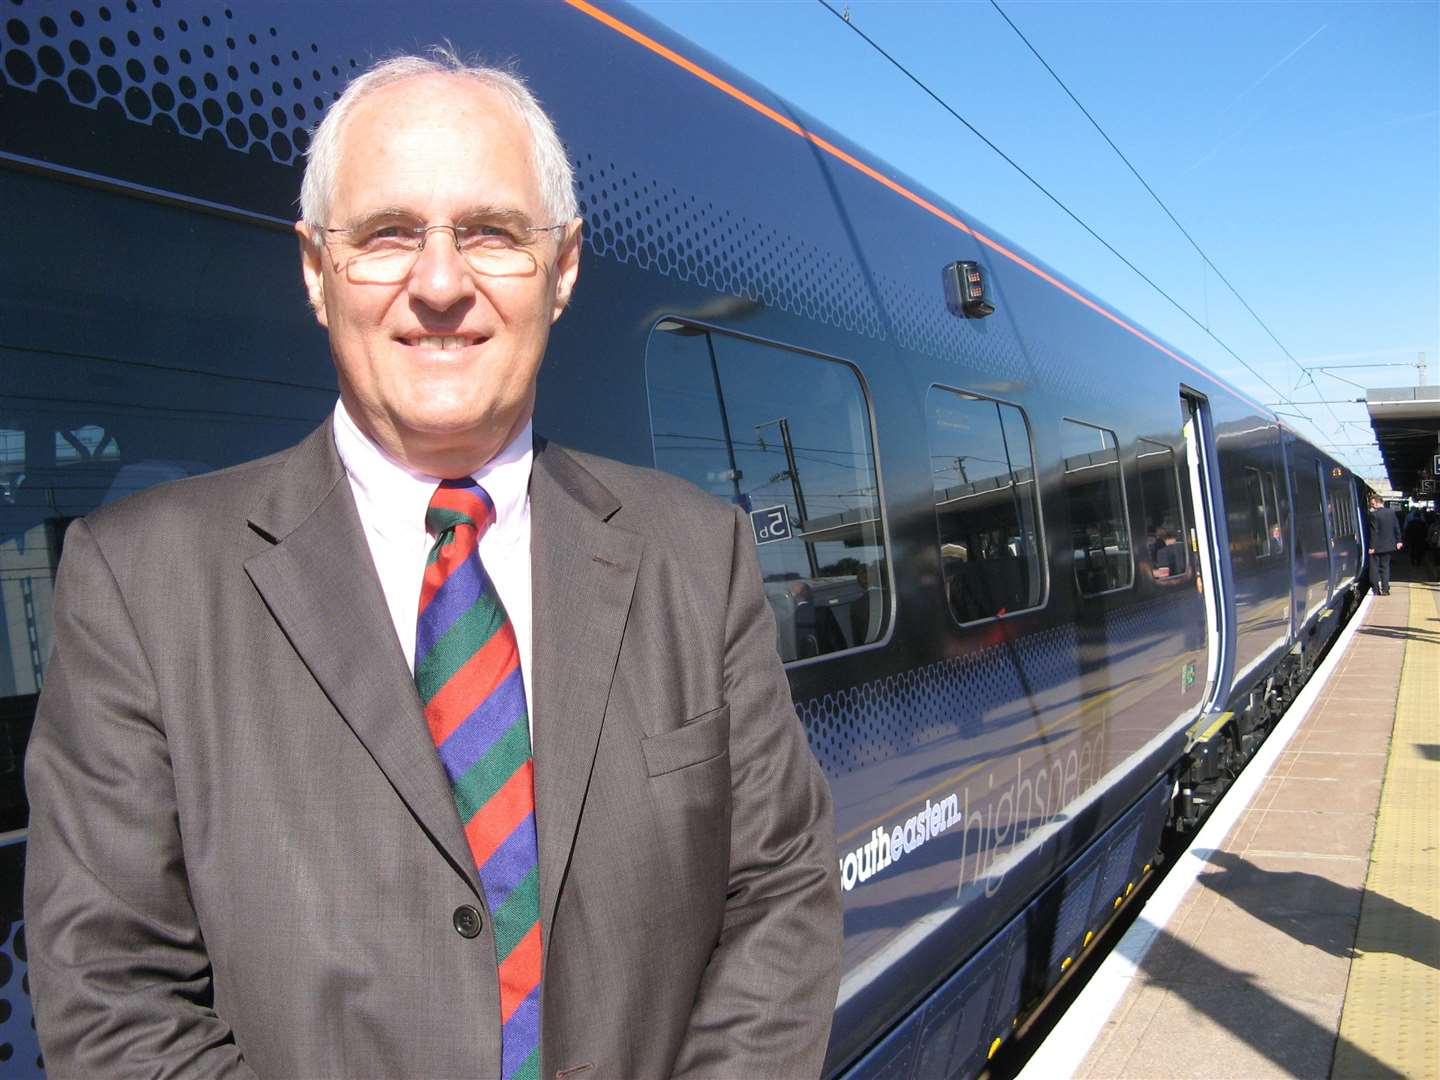 Geoff Miles, chair of SELEP's Kent and Medway Economic Partnership, outside a Javelin high-speed train